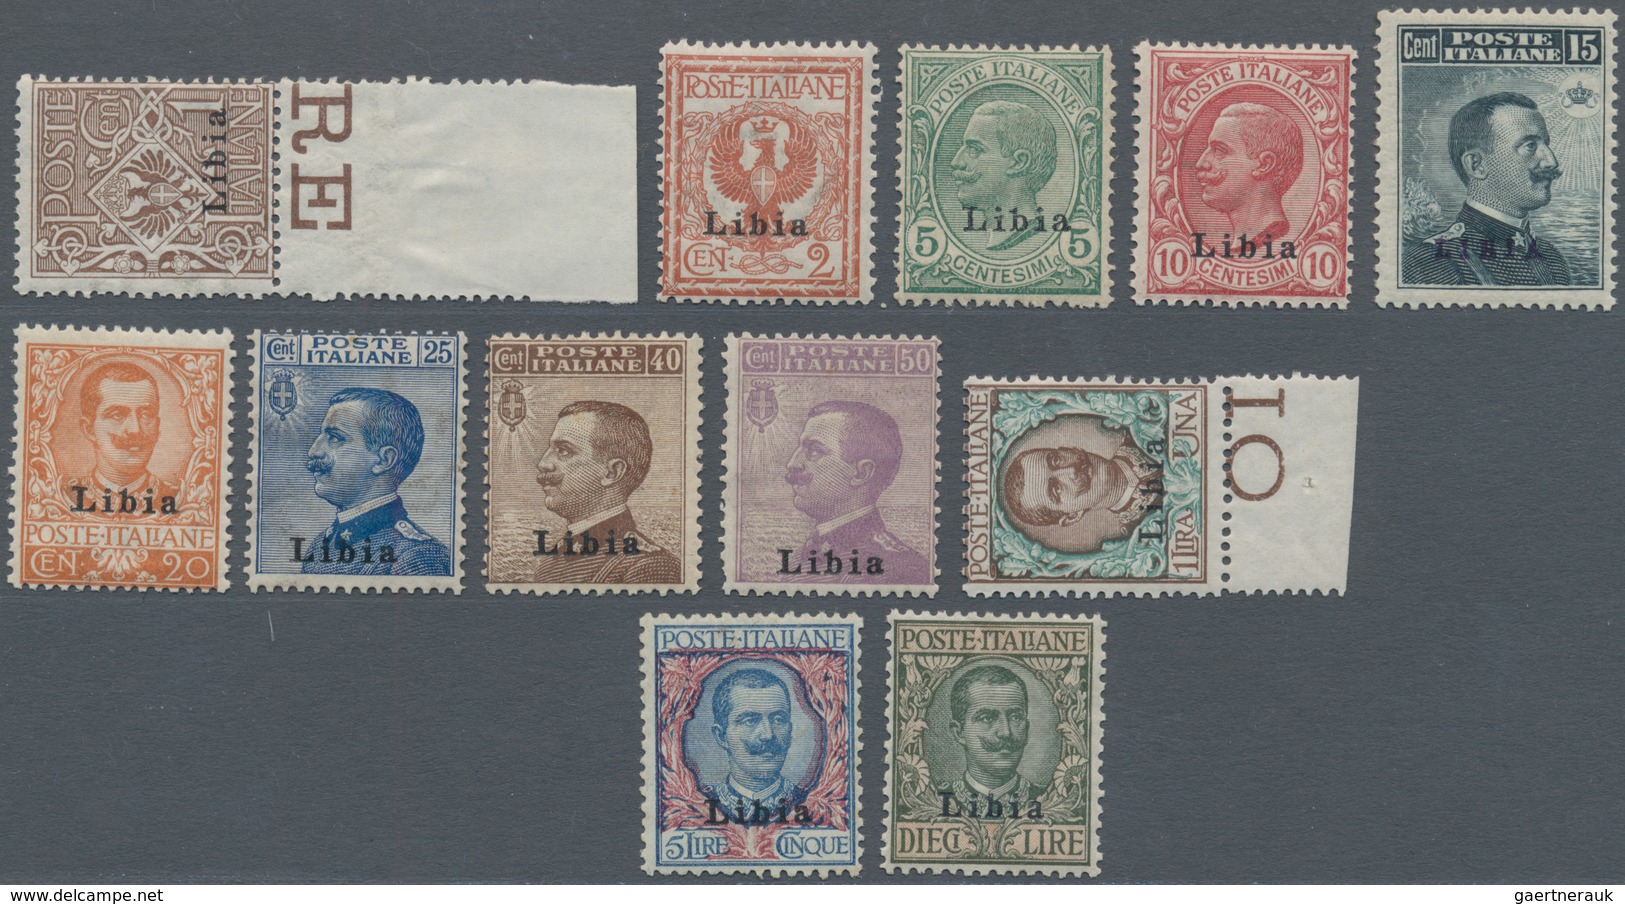 Italienisch-Libyen: 1912/1915: Stamps Of Italy "Michetti" And "Floreale" With Overprint LIBIA, Compl - Libia